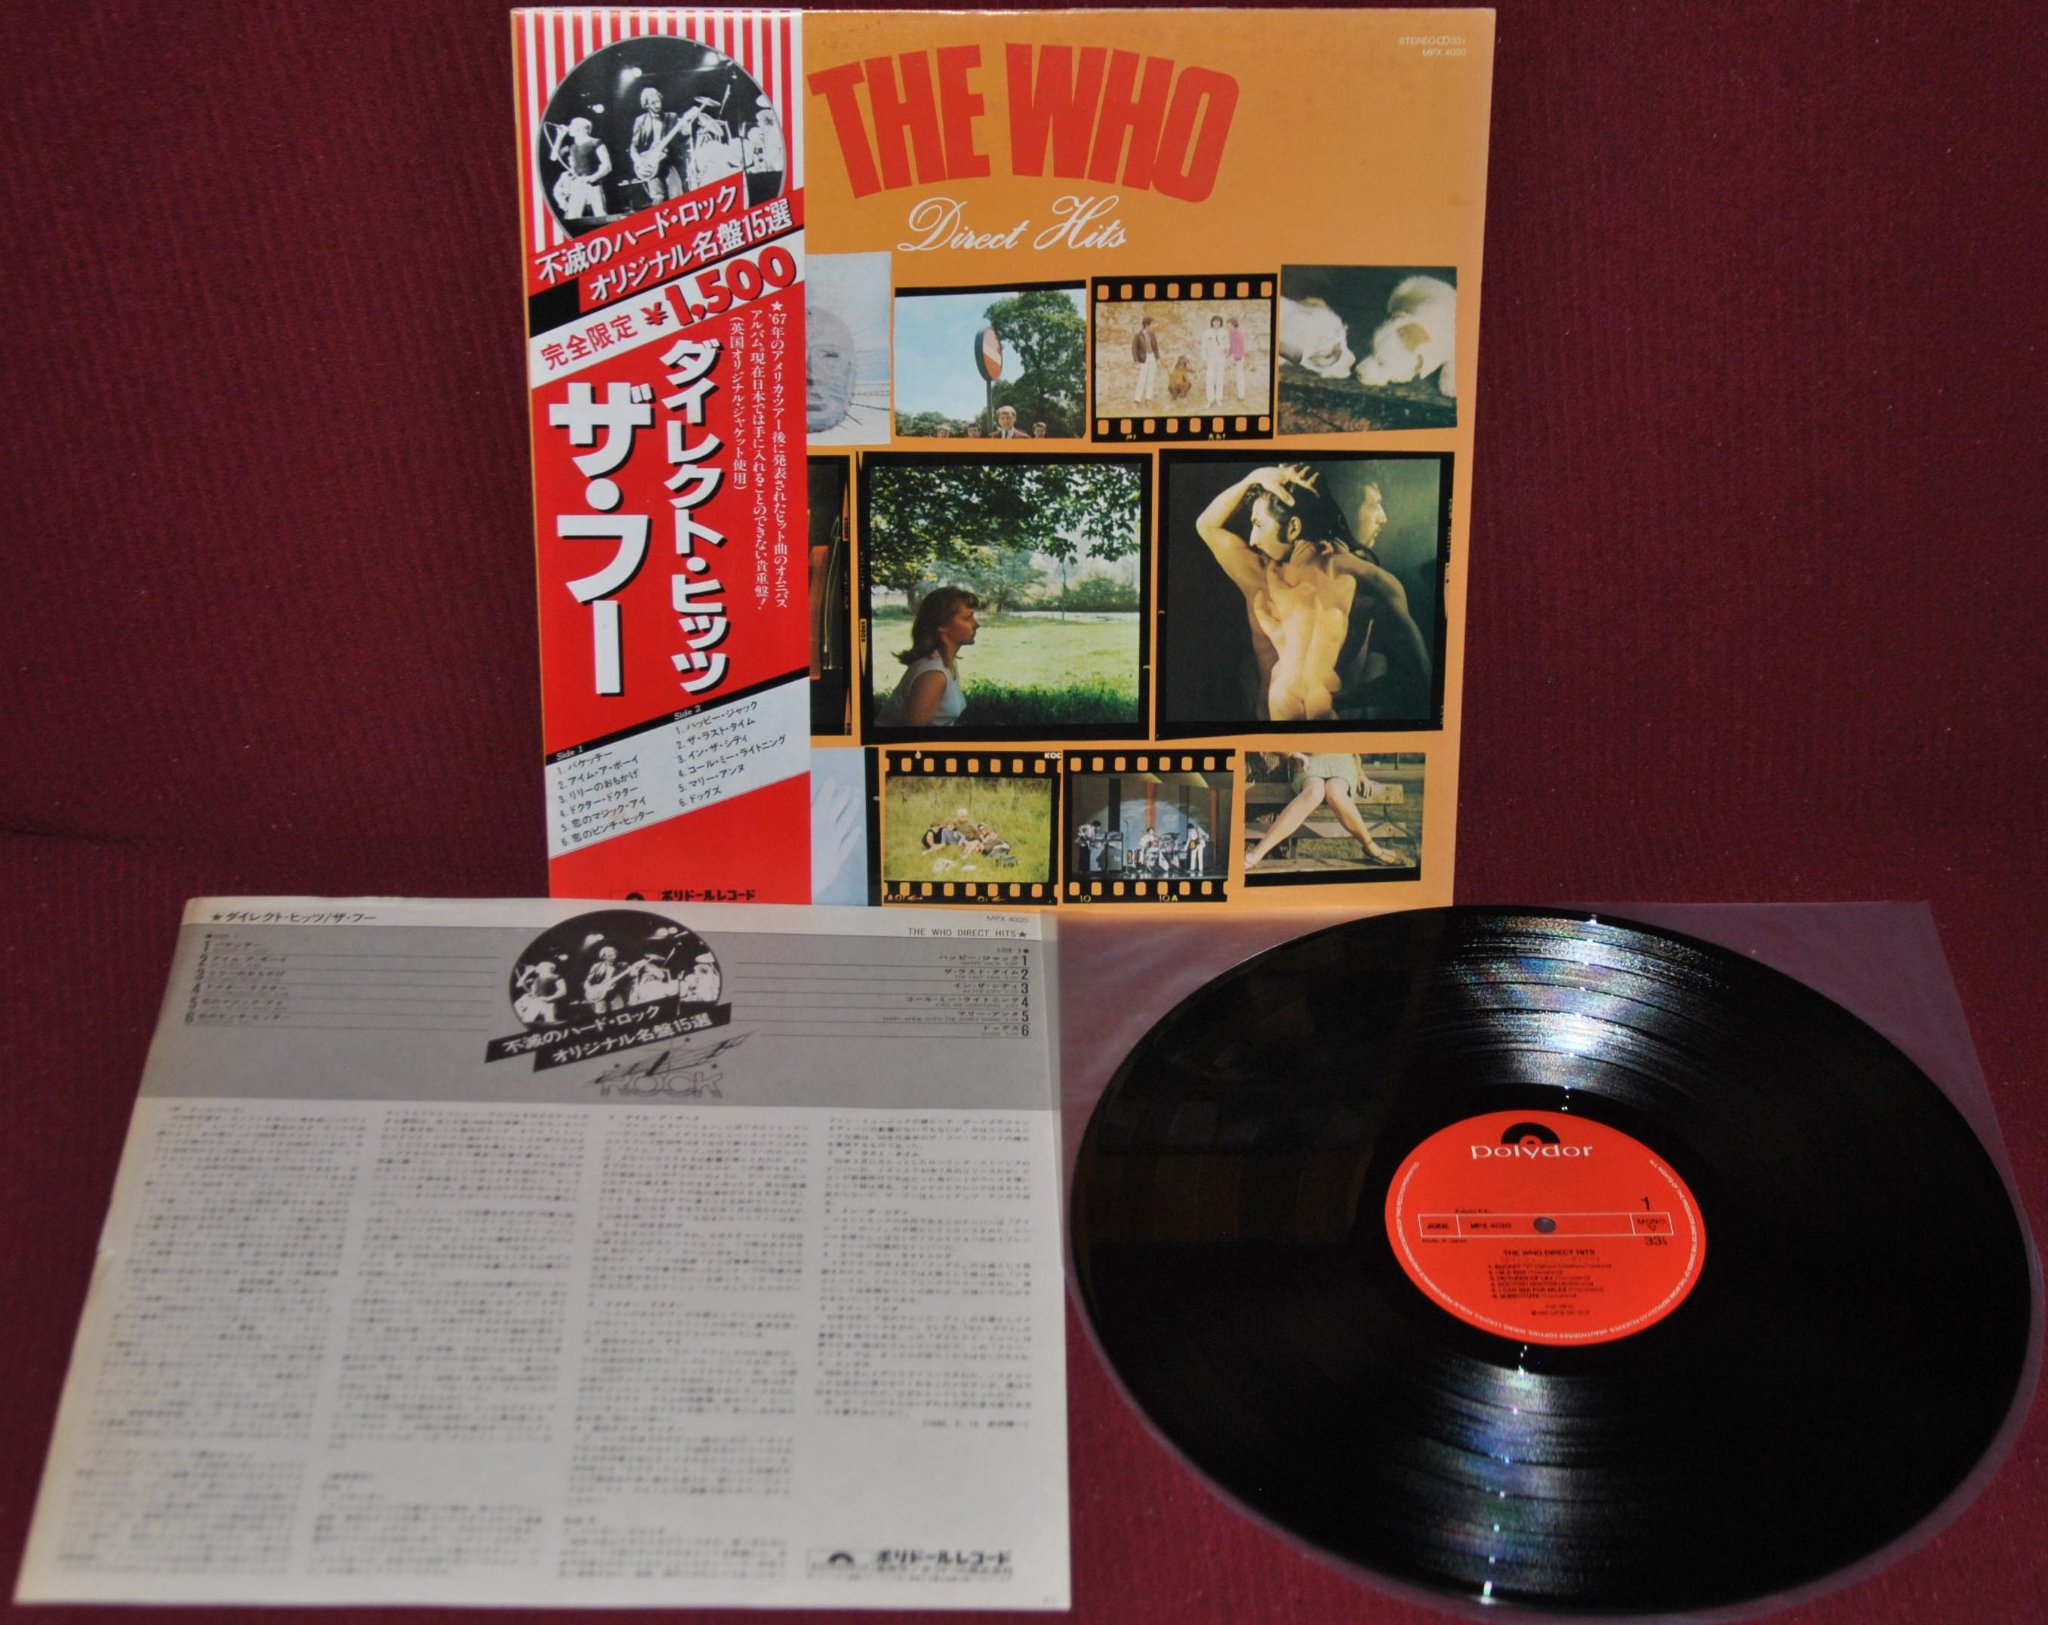 THE WHO – DIRECT HITS (COMPILATION) – POLYDOR MPX 4020 1980 – LP JAPAN OBI NM

L…